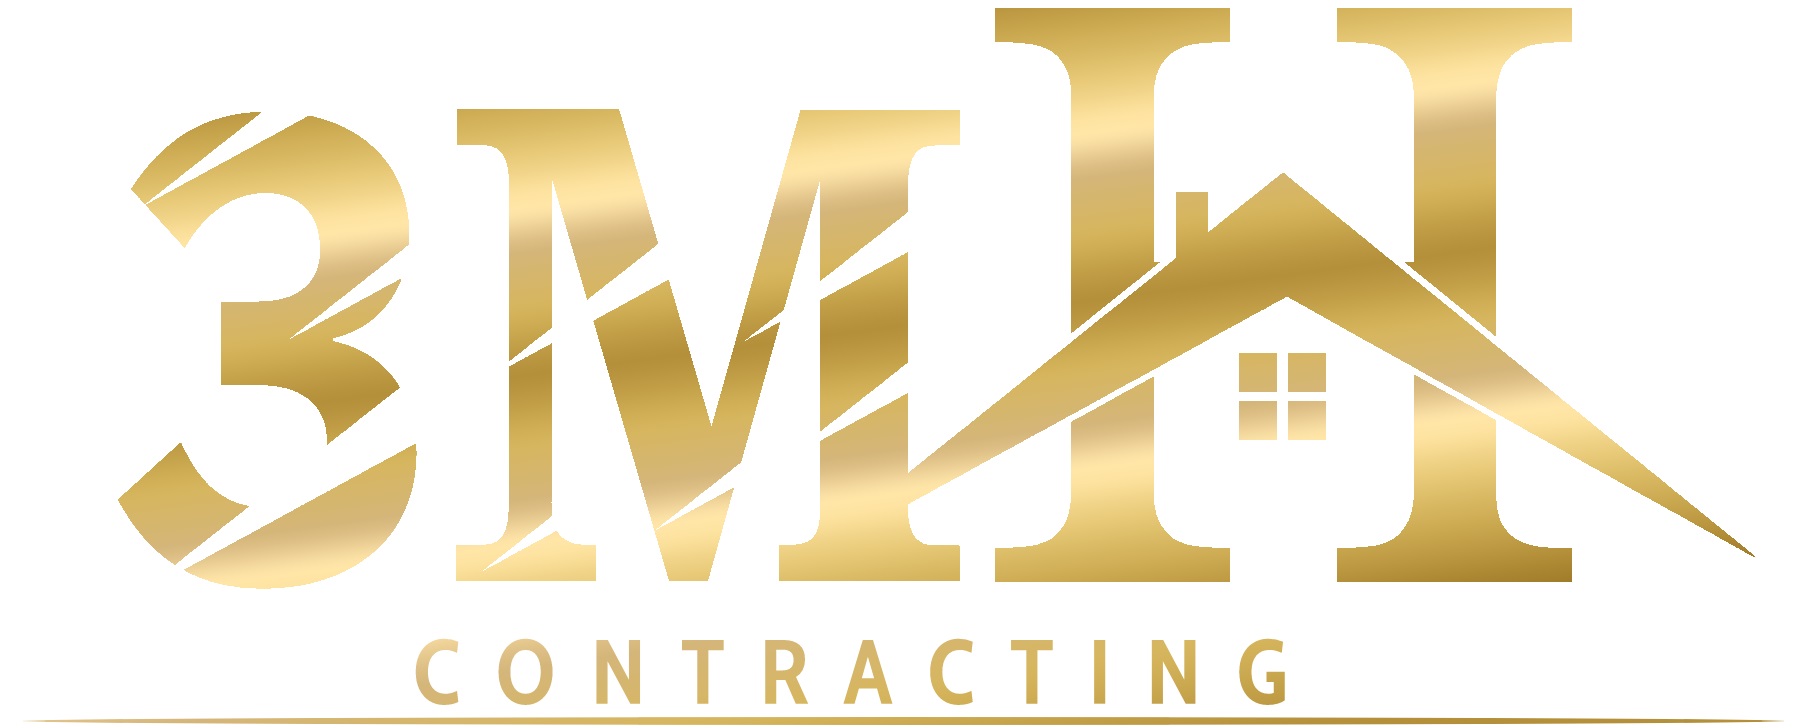 3MH-Contracting